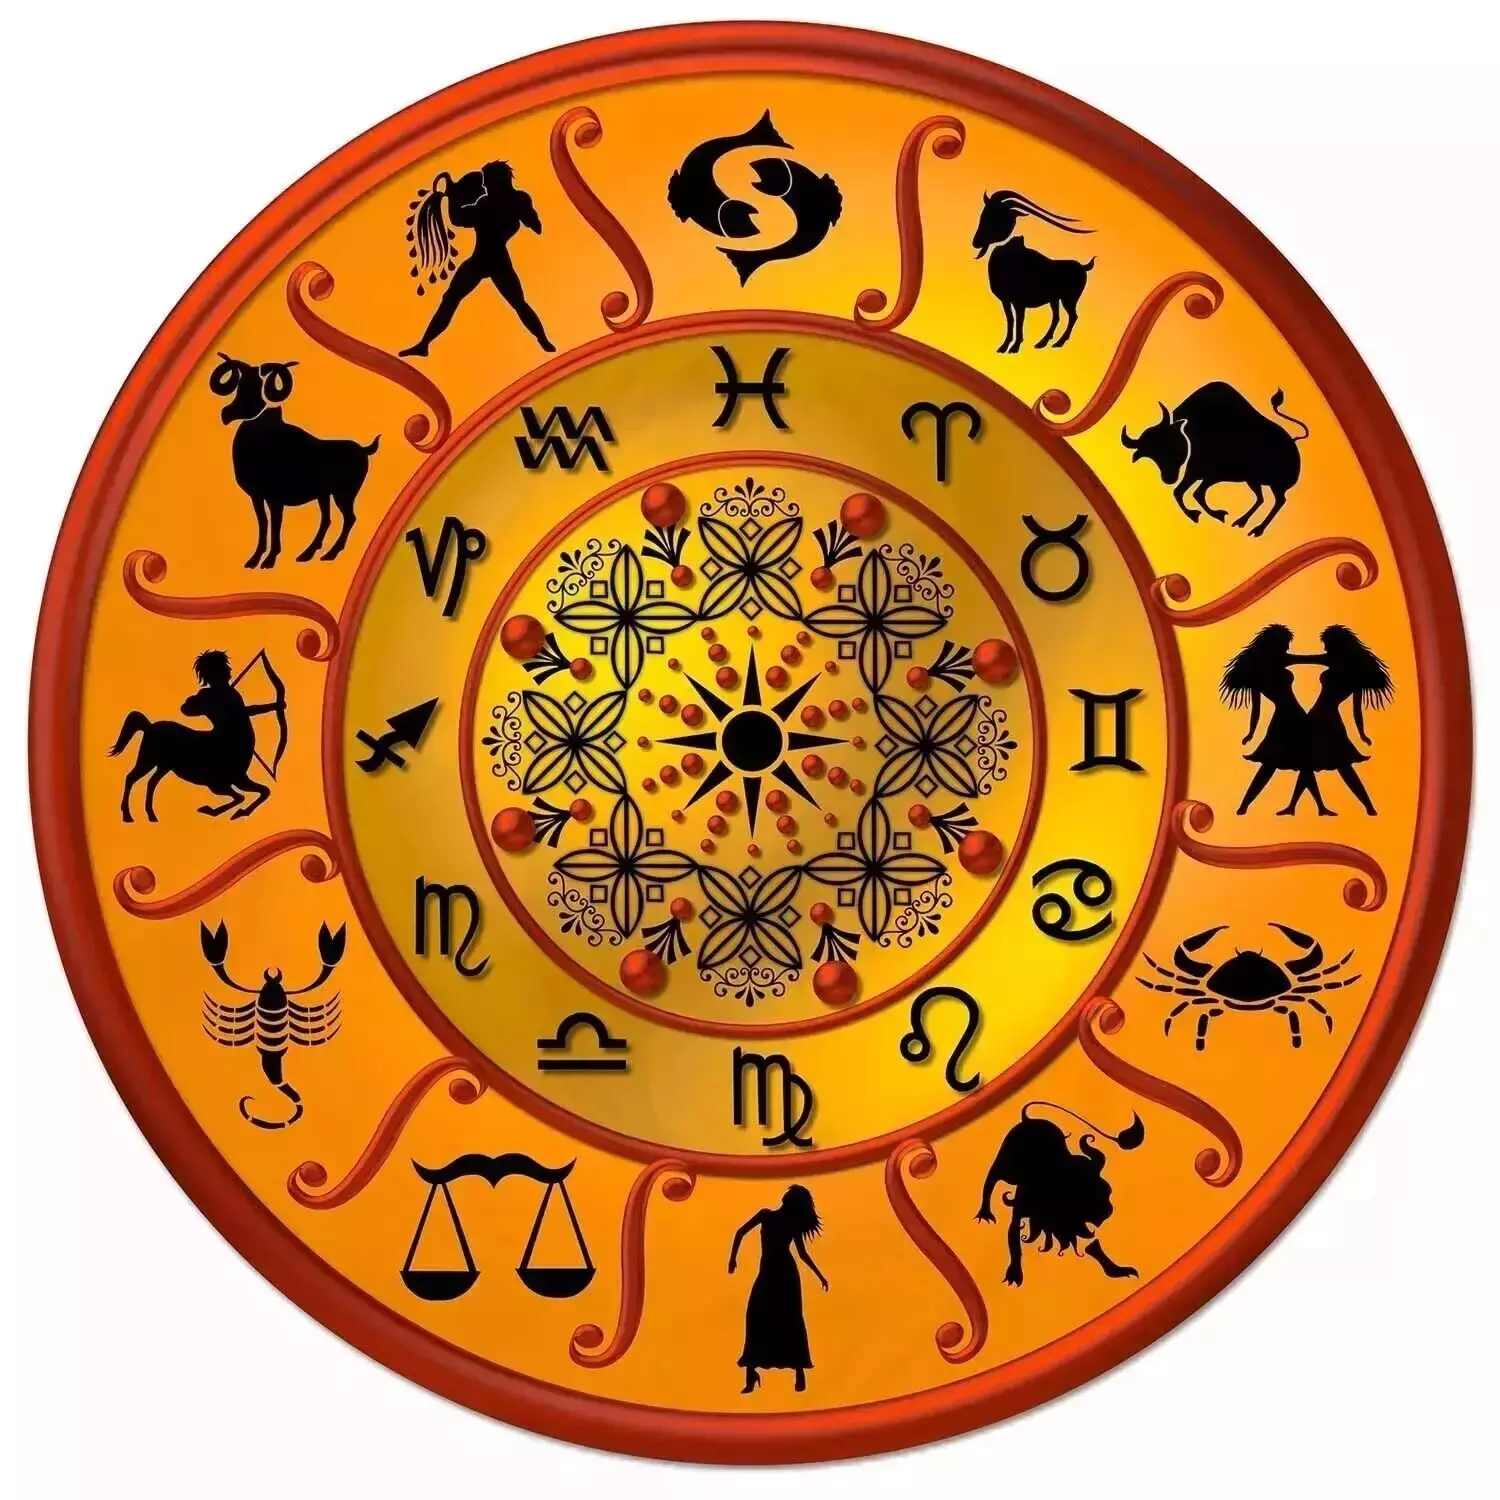 25 February  – Know your todays horoscope